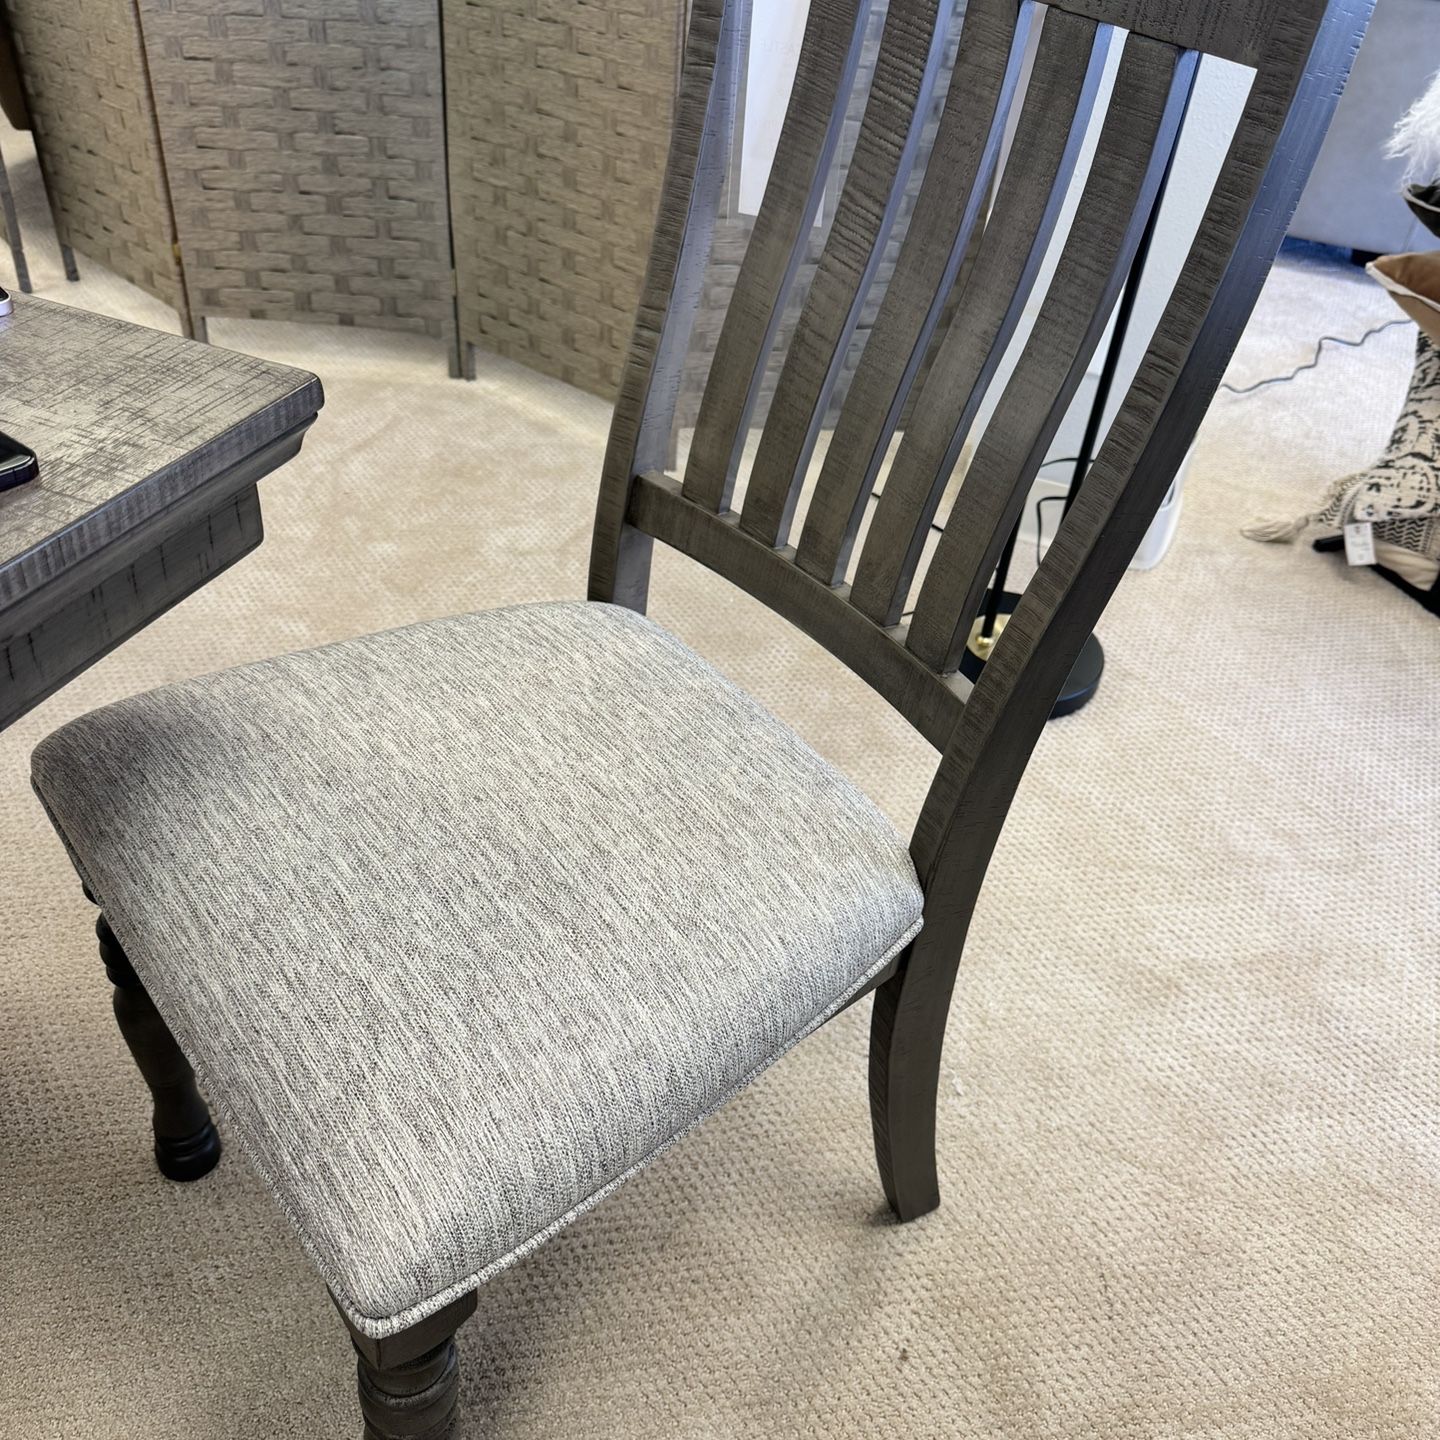  ✅SIDE CHAIR Dining Chair /per Each Fabric Seat Wooden Back Farmhouse, Antique Gray Upholstered